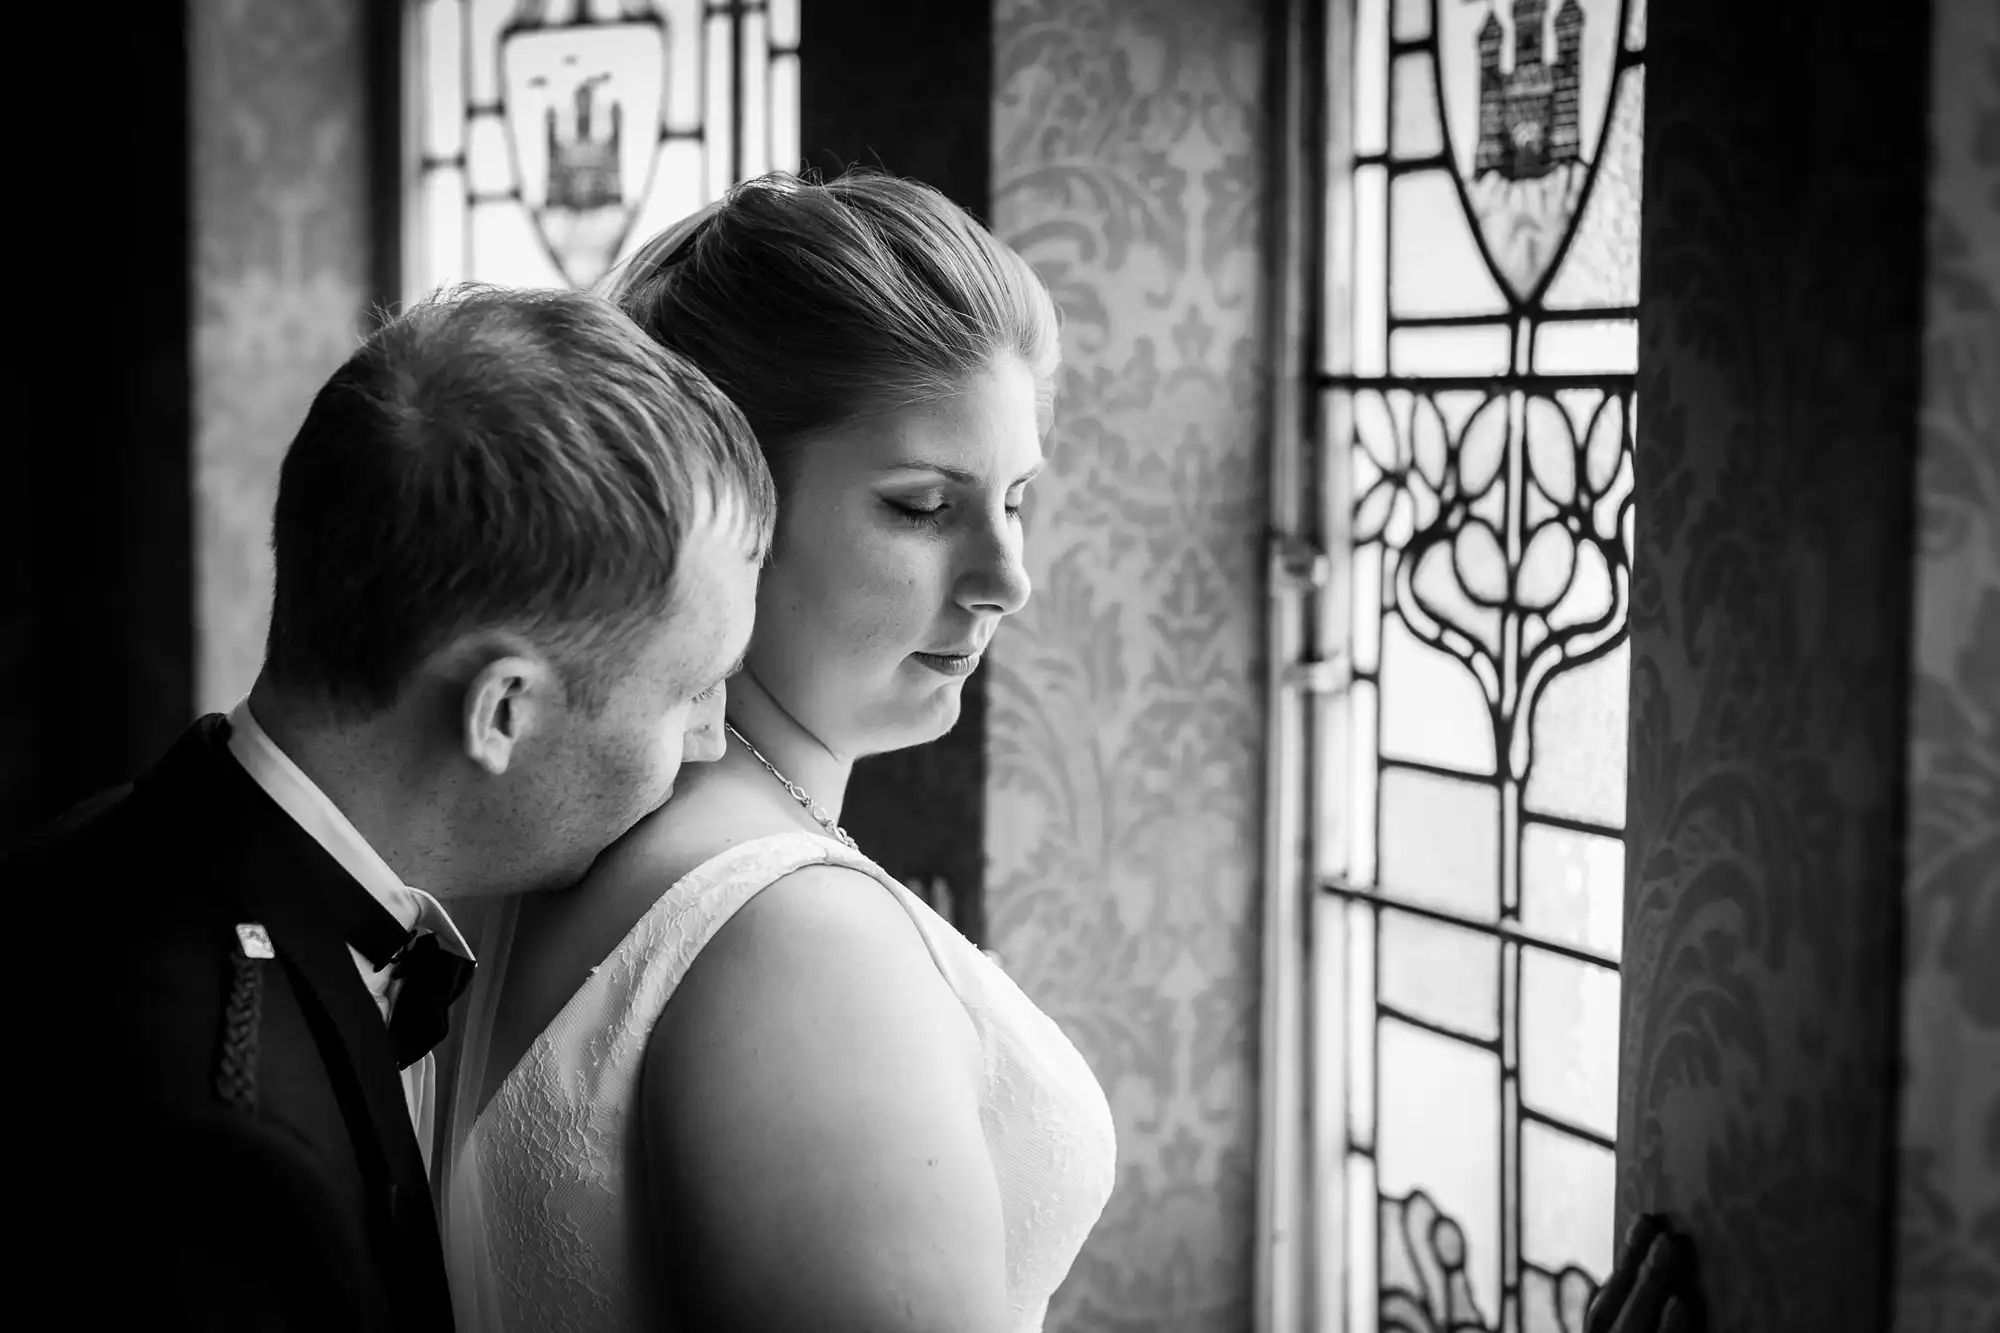 A bride and groom in wedding attire stand closely together near a window with stained glass, the groom gently resting his head on the bride's shoulder.